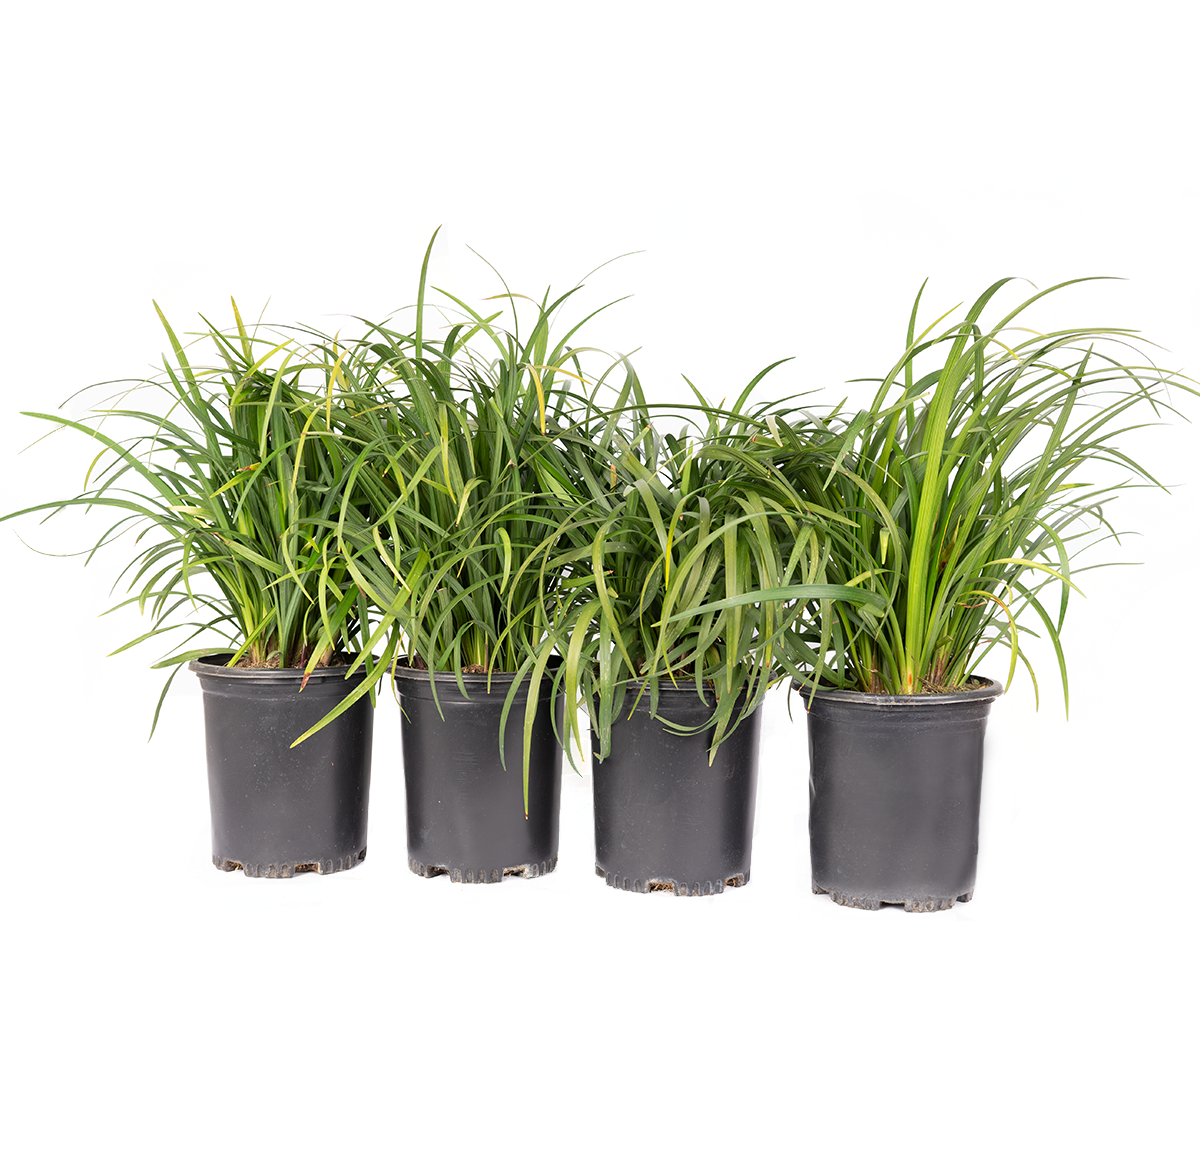 four pack of potted ingle Liriope Turf often called big blue lilyturf, lilyturf, border grass, and monkey grass